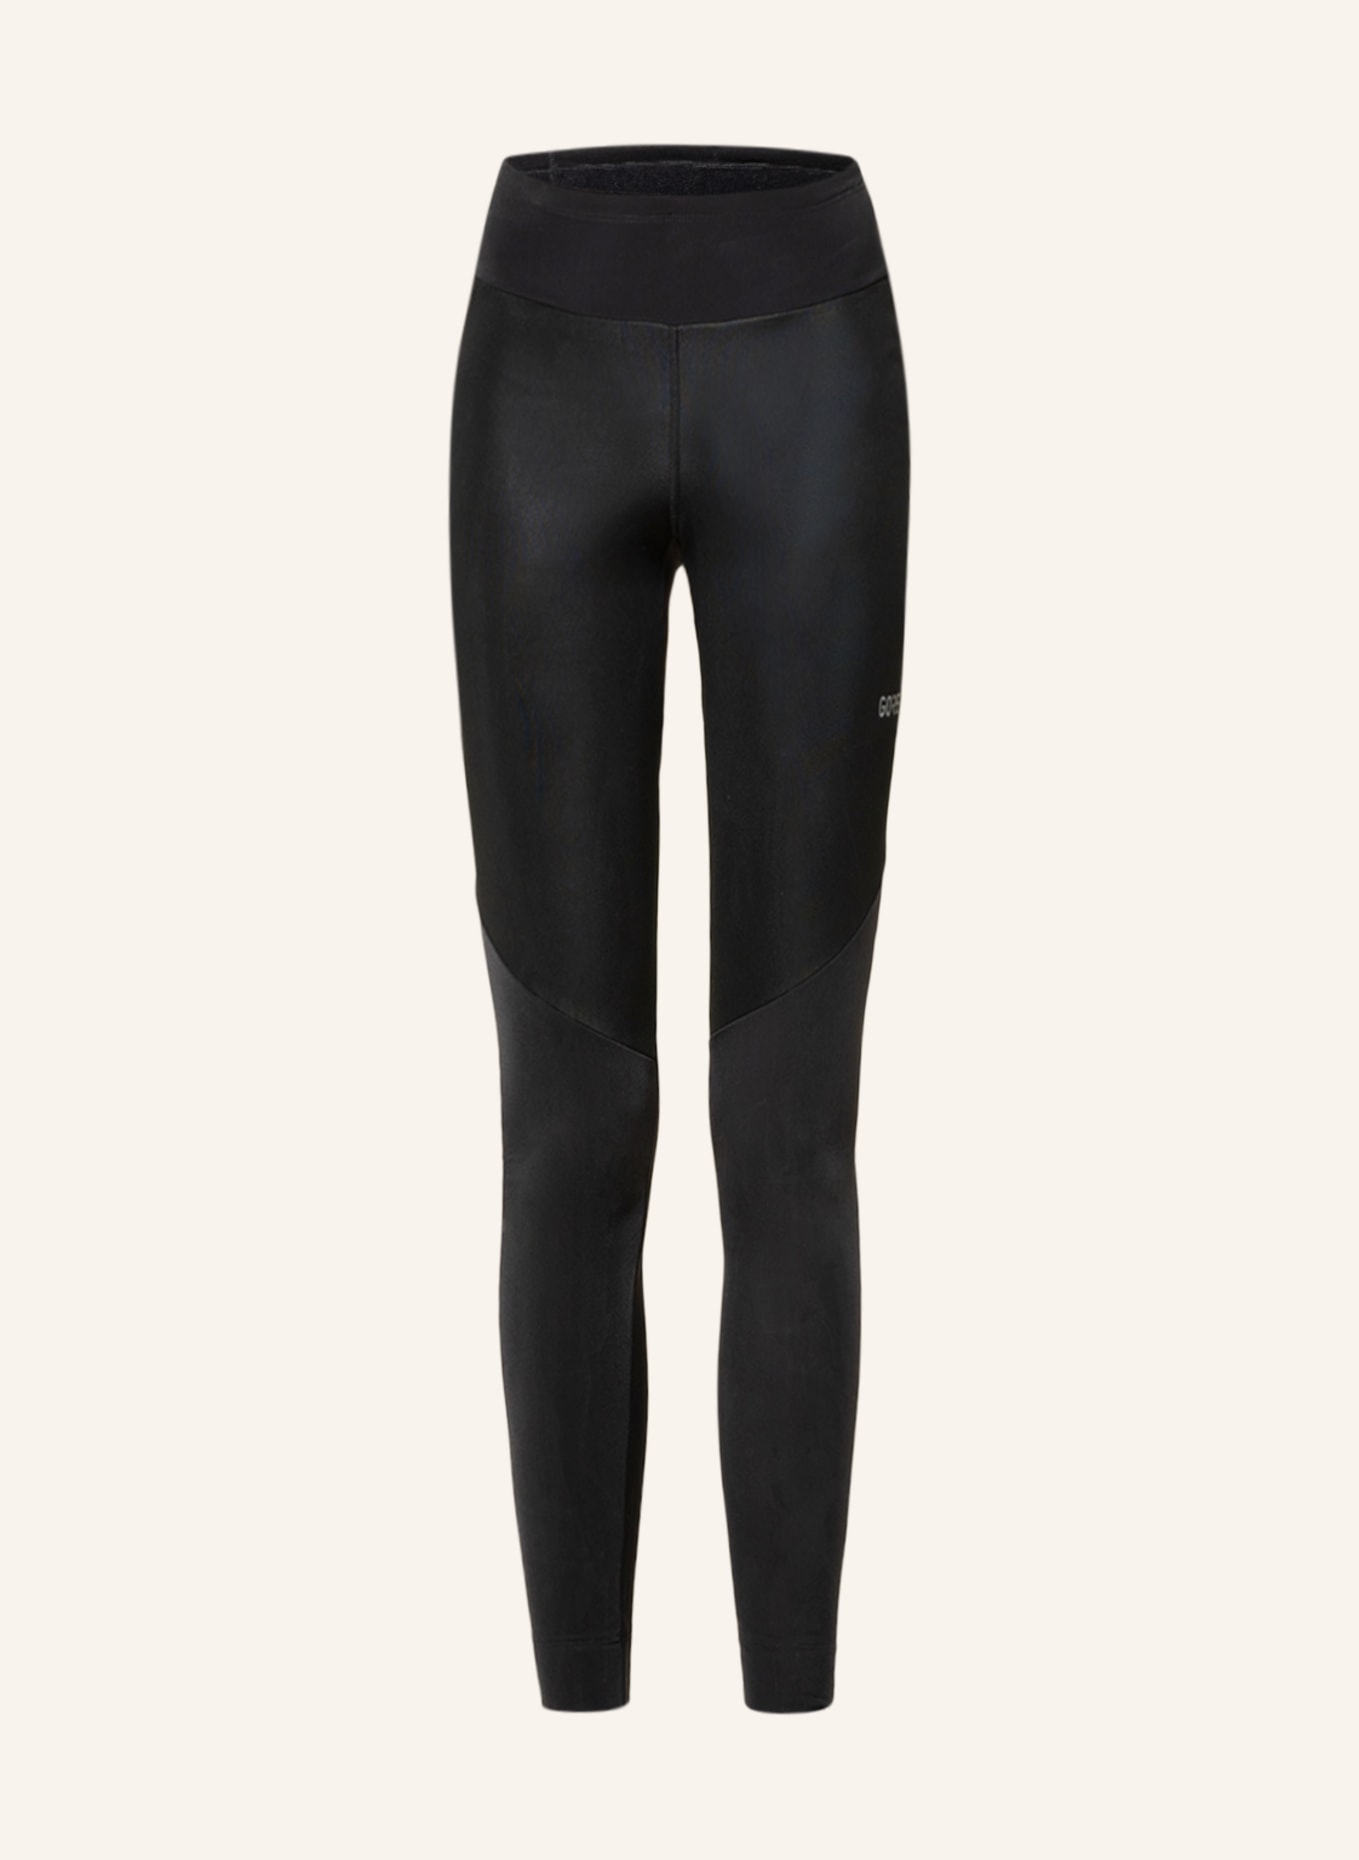 GORE RUNNING WEAR Running pants R3 PARTIAL GORE® WINDSTOPPER®, Color: BLACK (Image 1)